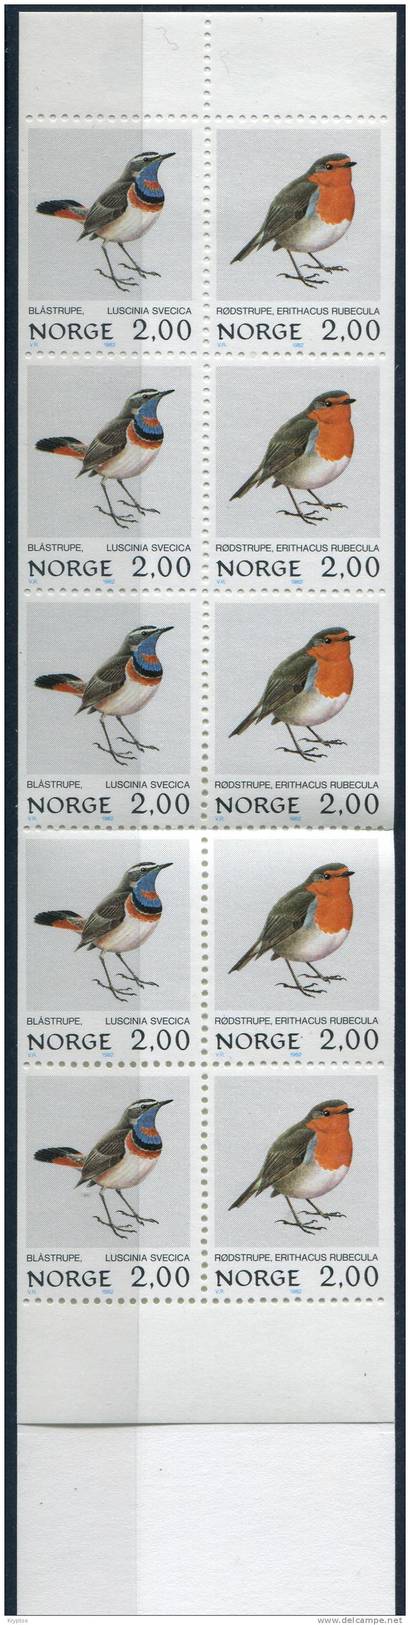 Norway 1982 - Birds - Complete Booklet Set - Libretti